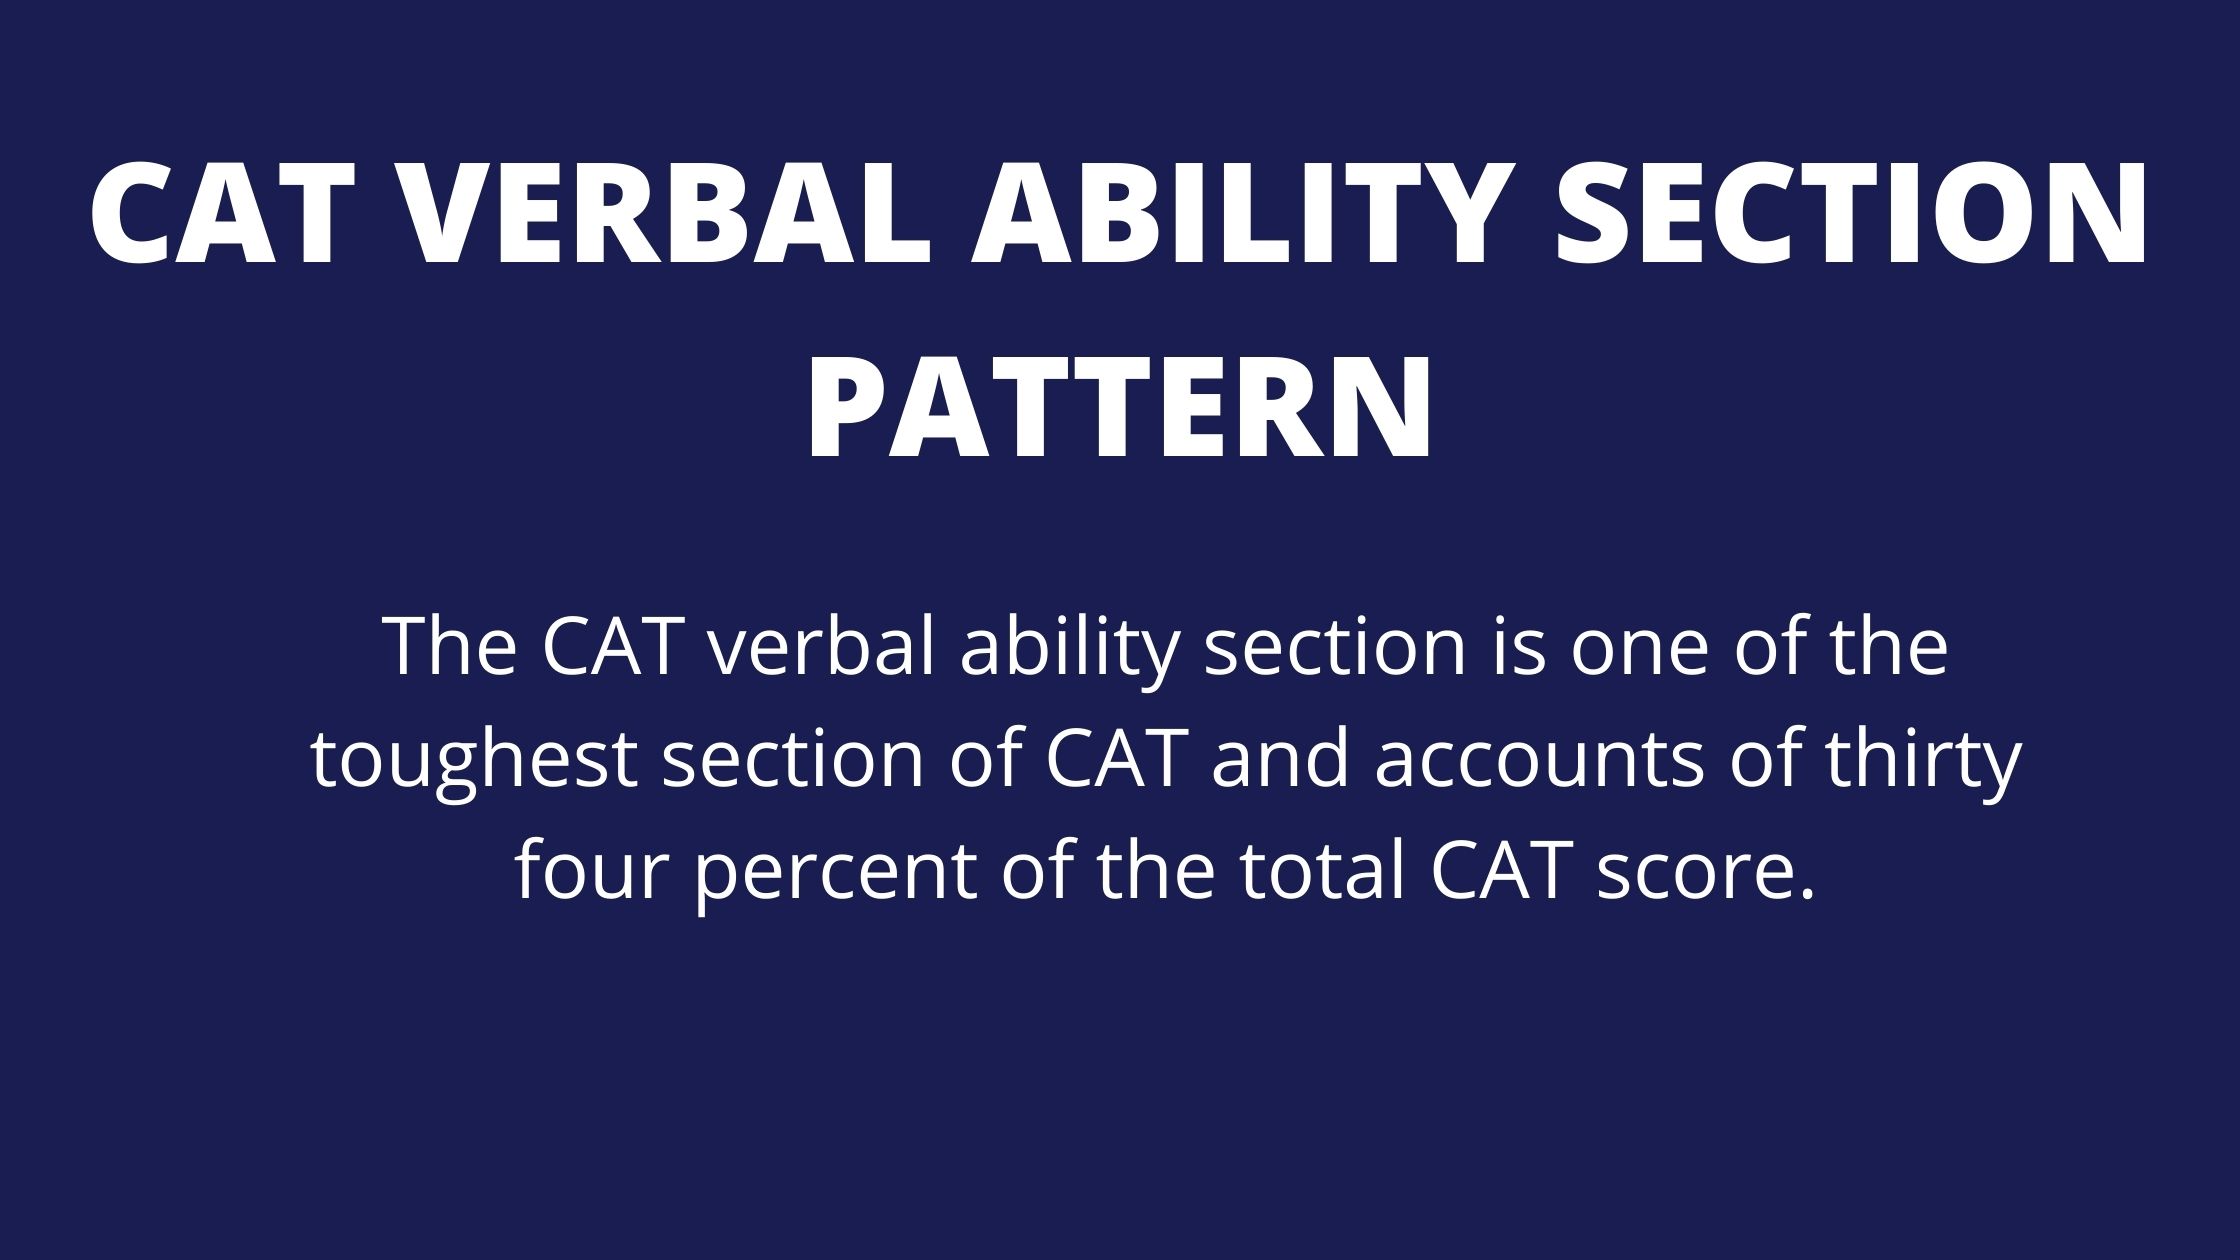 CAT VERBAL ABILITY SECTION PATTERN